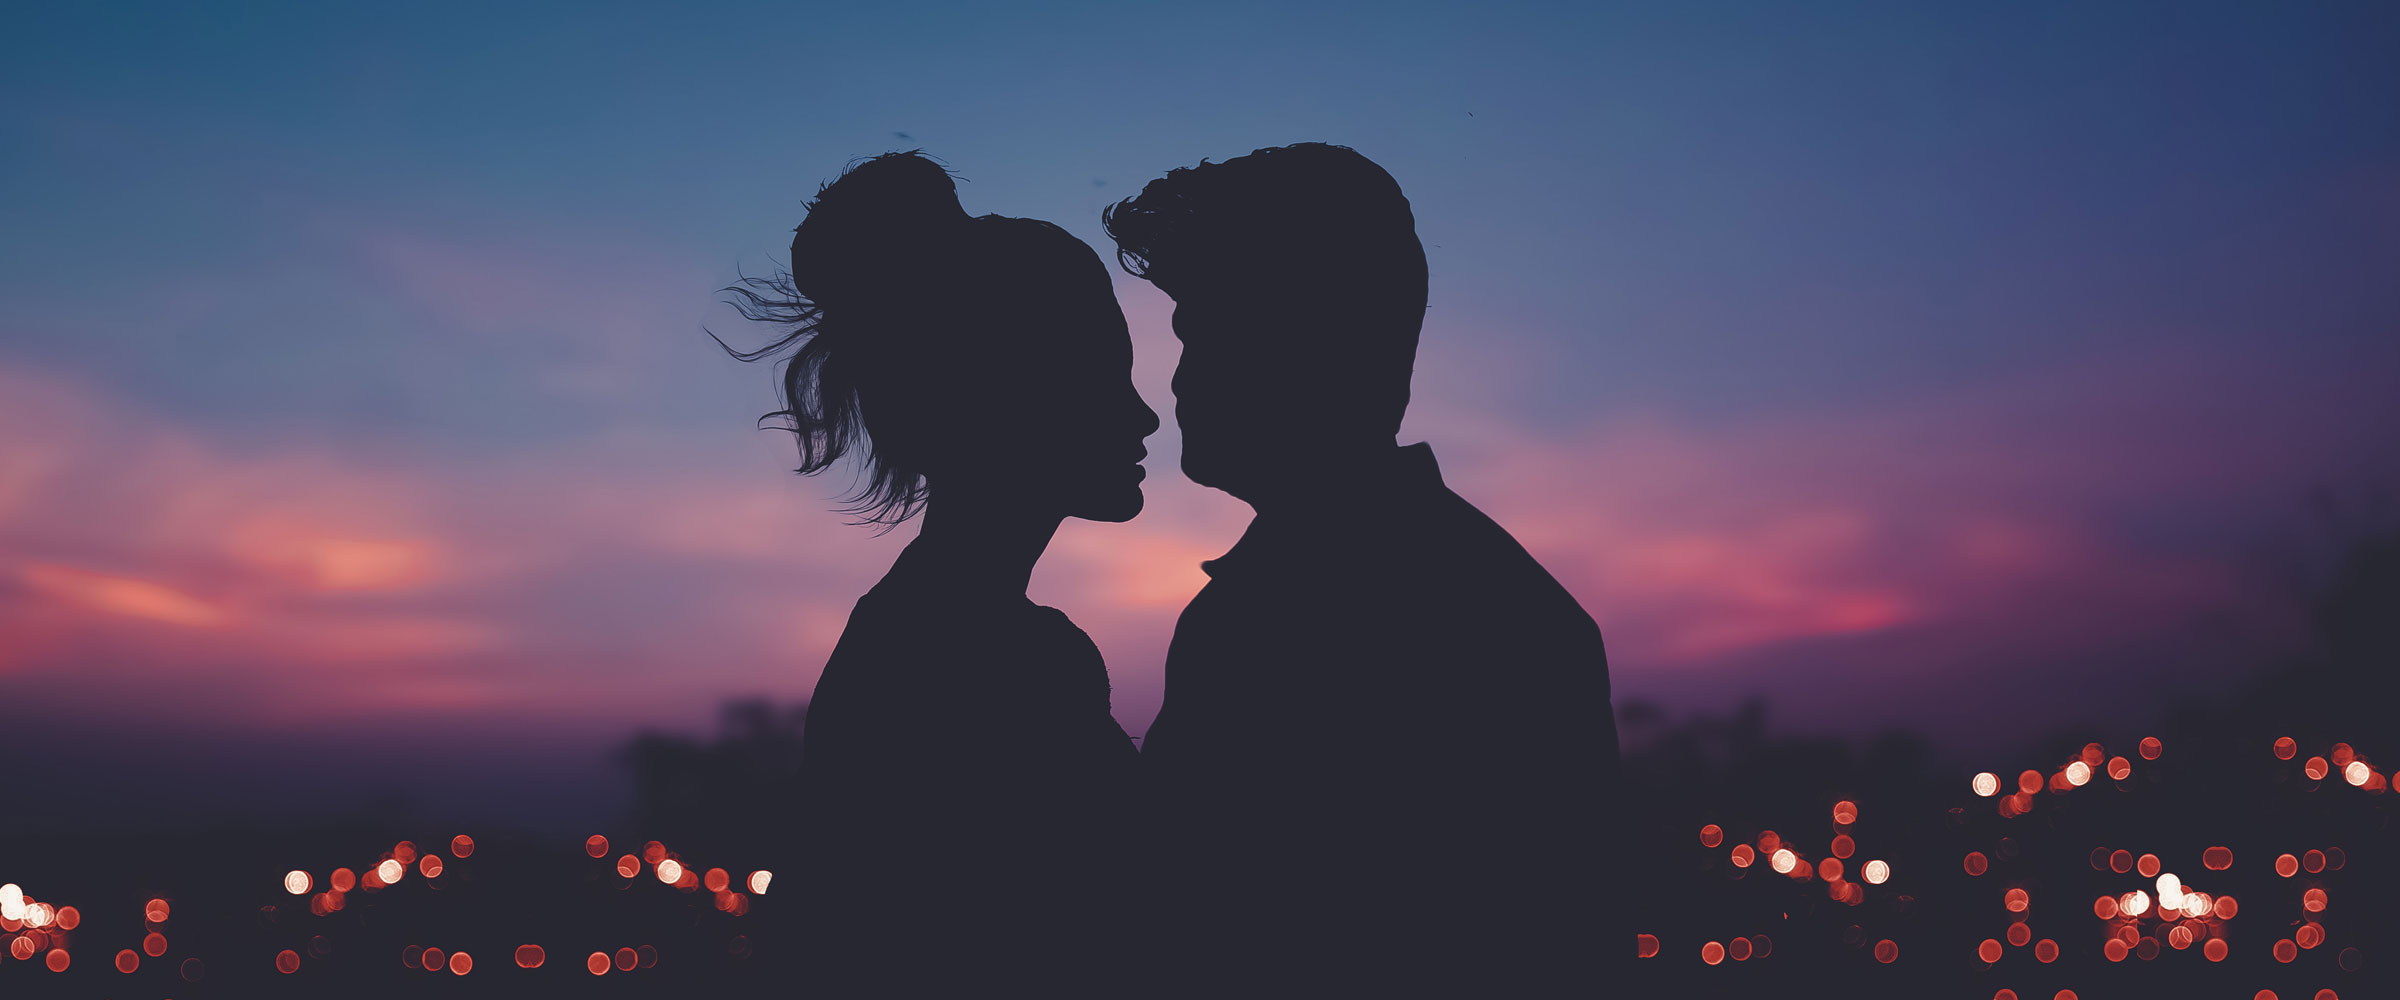 Silhouette of a couple against a sunset.